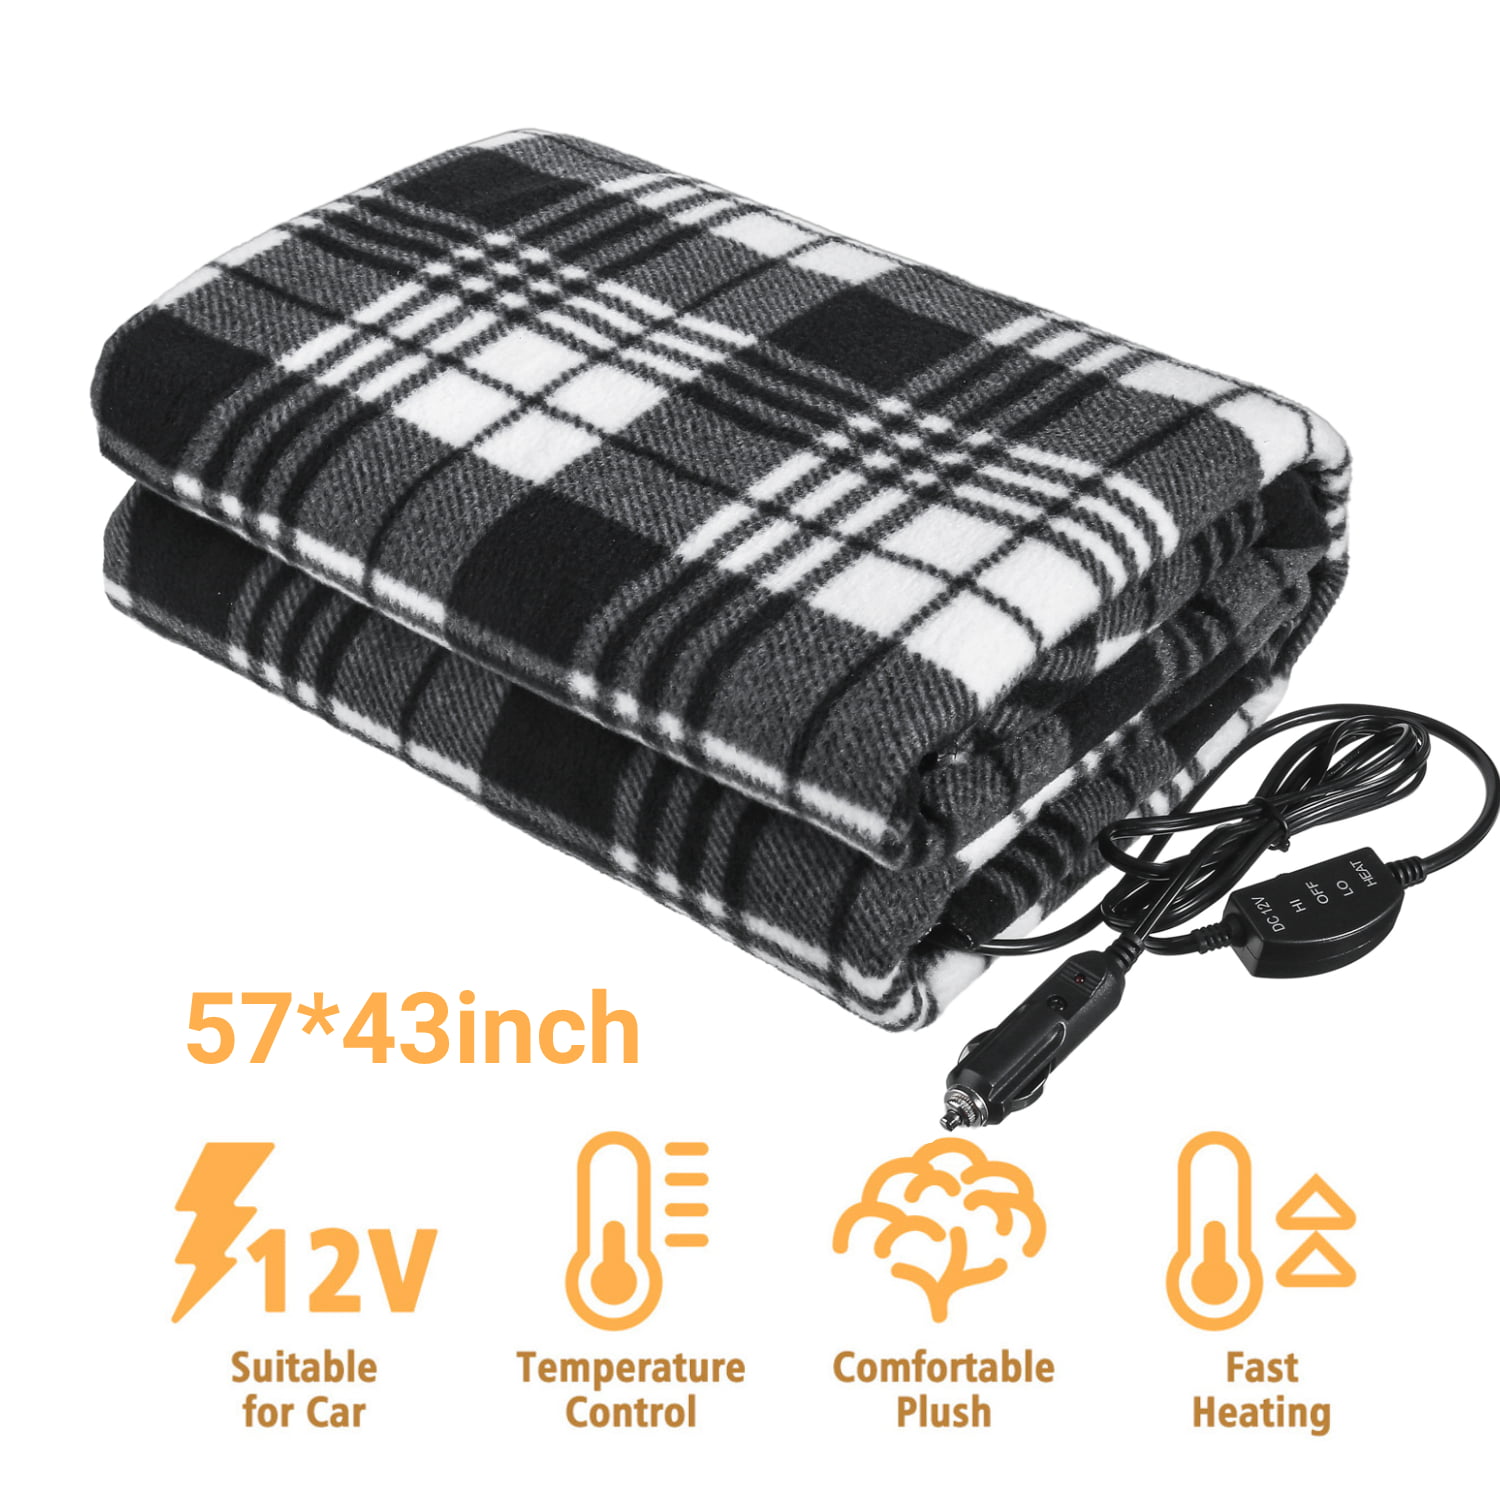 12V HEATED TRAVEL ELECTRIC BLANKET 8FT LEAD PVC BAG COLOUR HEADER EXTRA LARGE 